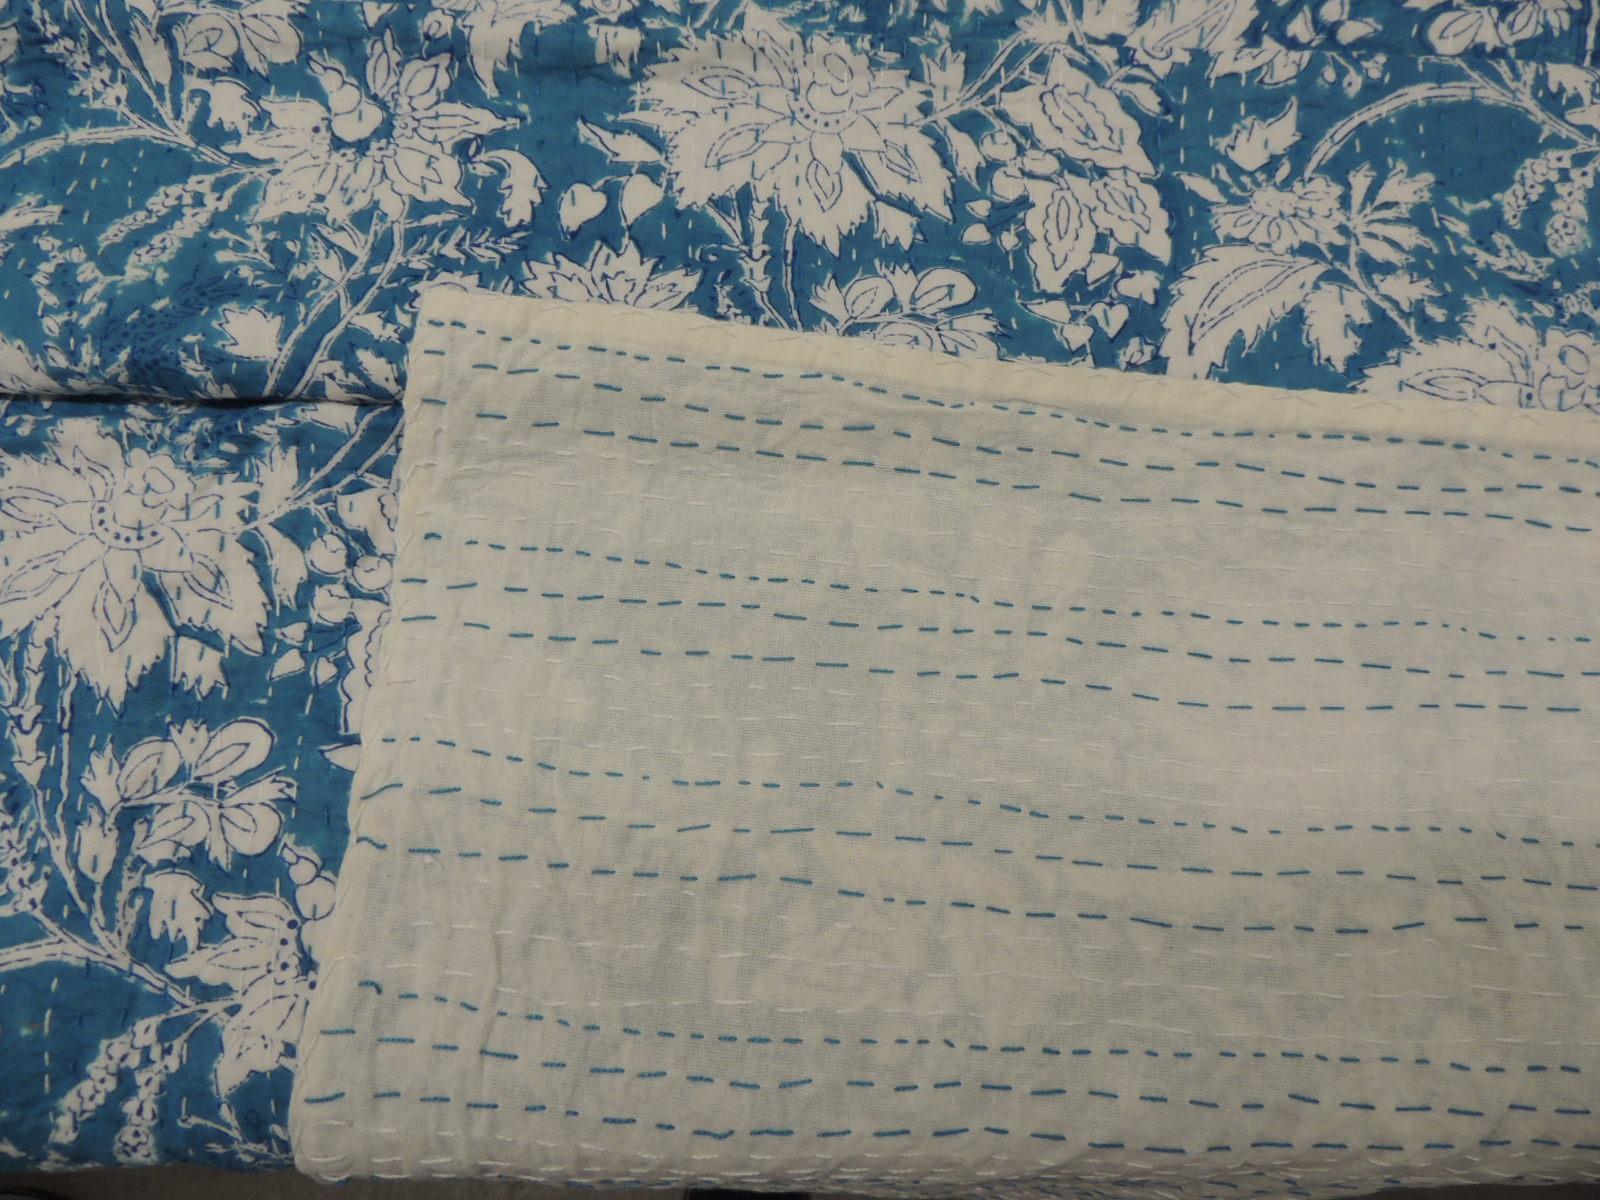 Blue and White Quilted Blanket.
Blue and white floral pattern with hand-stitches all around.
Off white cotton backing with blue and white threads.
Size: 90